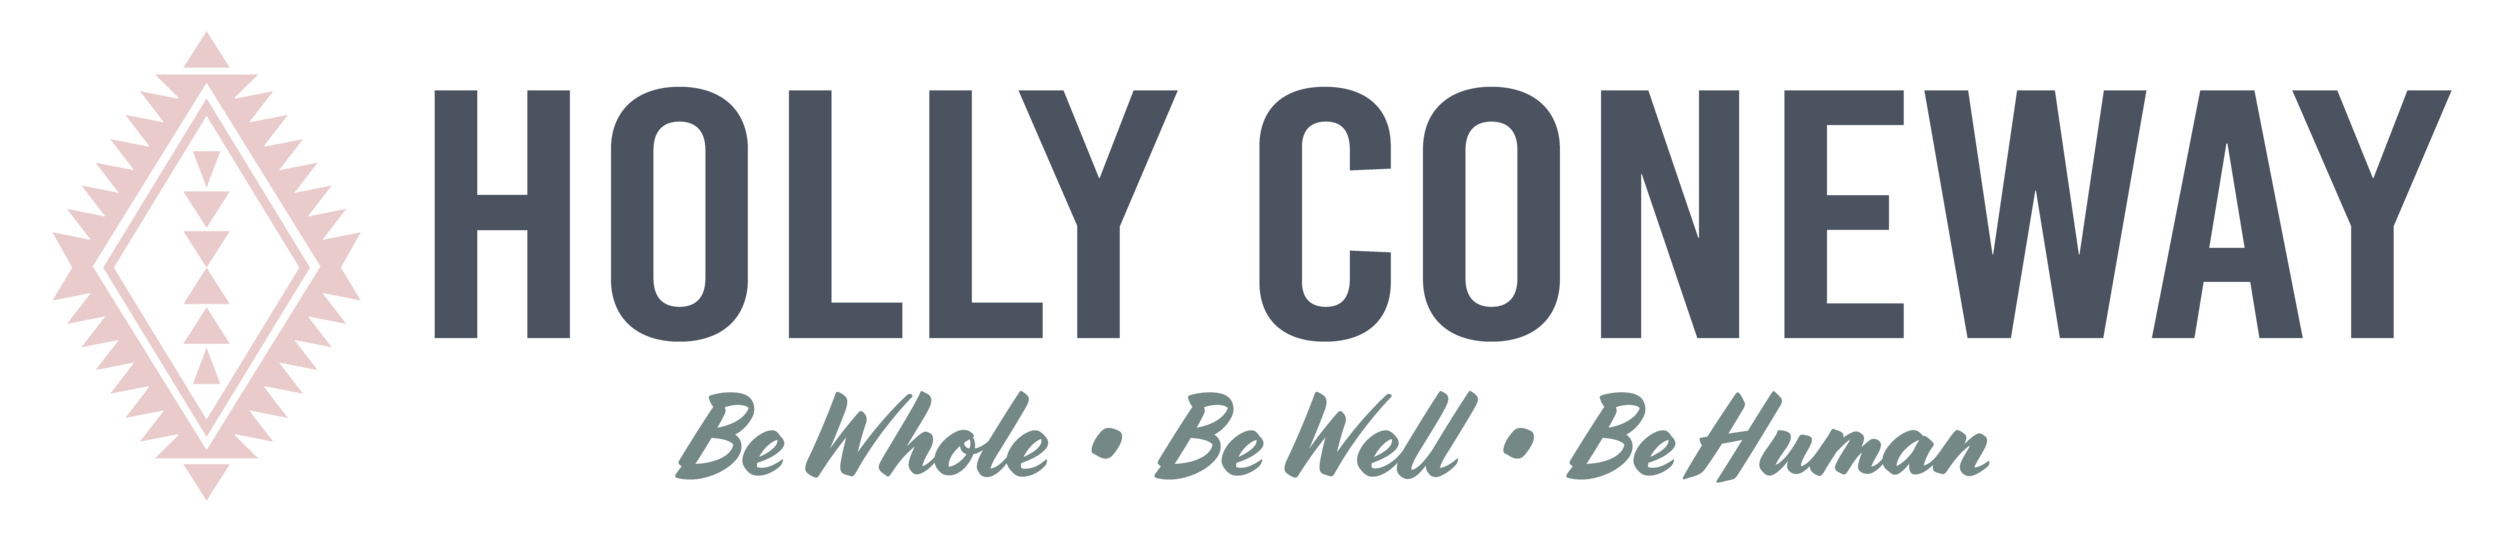 Holly Coneway | Be Whole. Be Well. Be Human